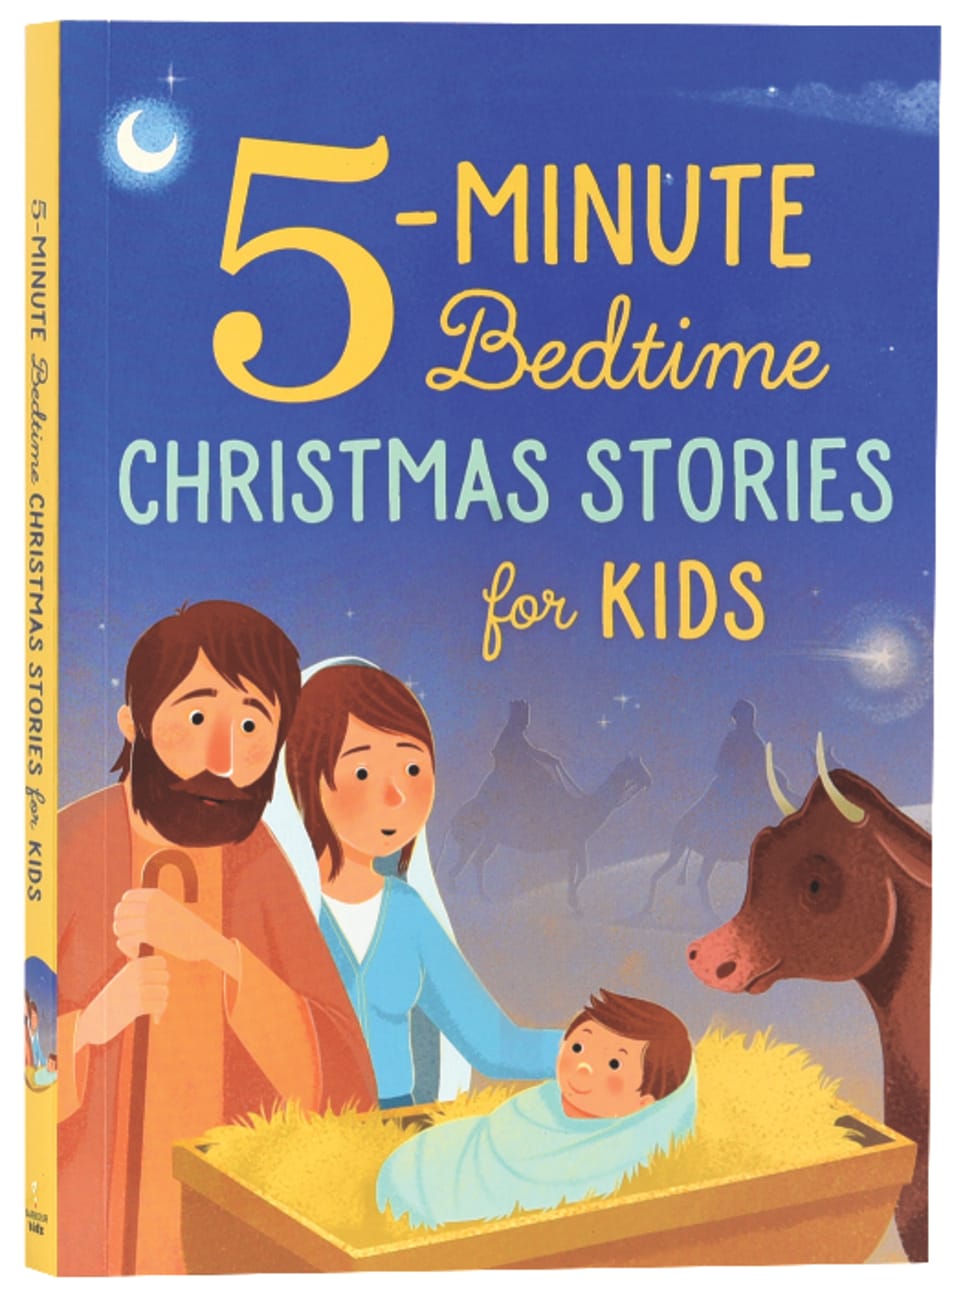 5-MINUTE BEDTIME CHRISTMAS STORIES FOR KIDS